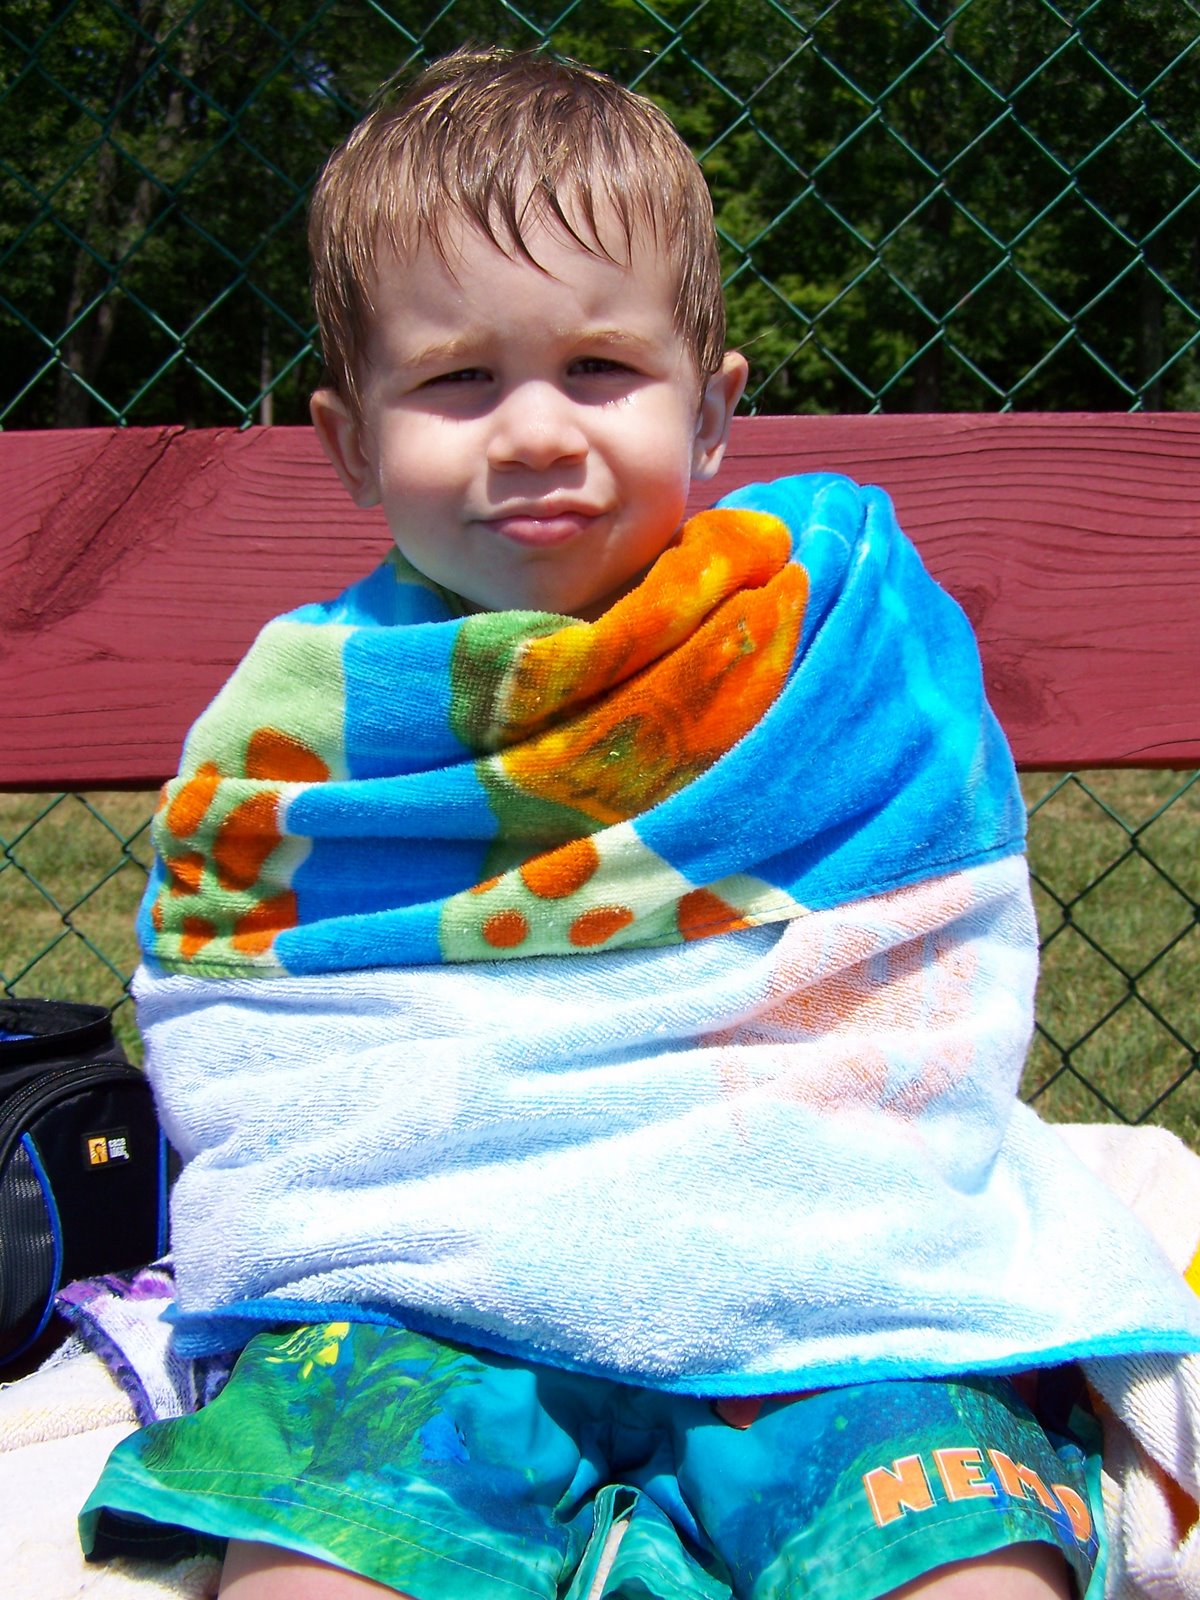 [Josh+Wrapped+in+Towel+at+Pool.NY082007.jpg]